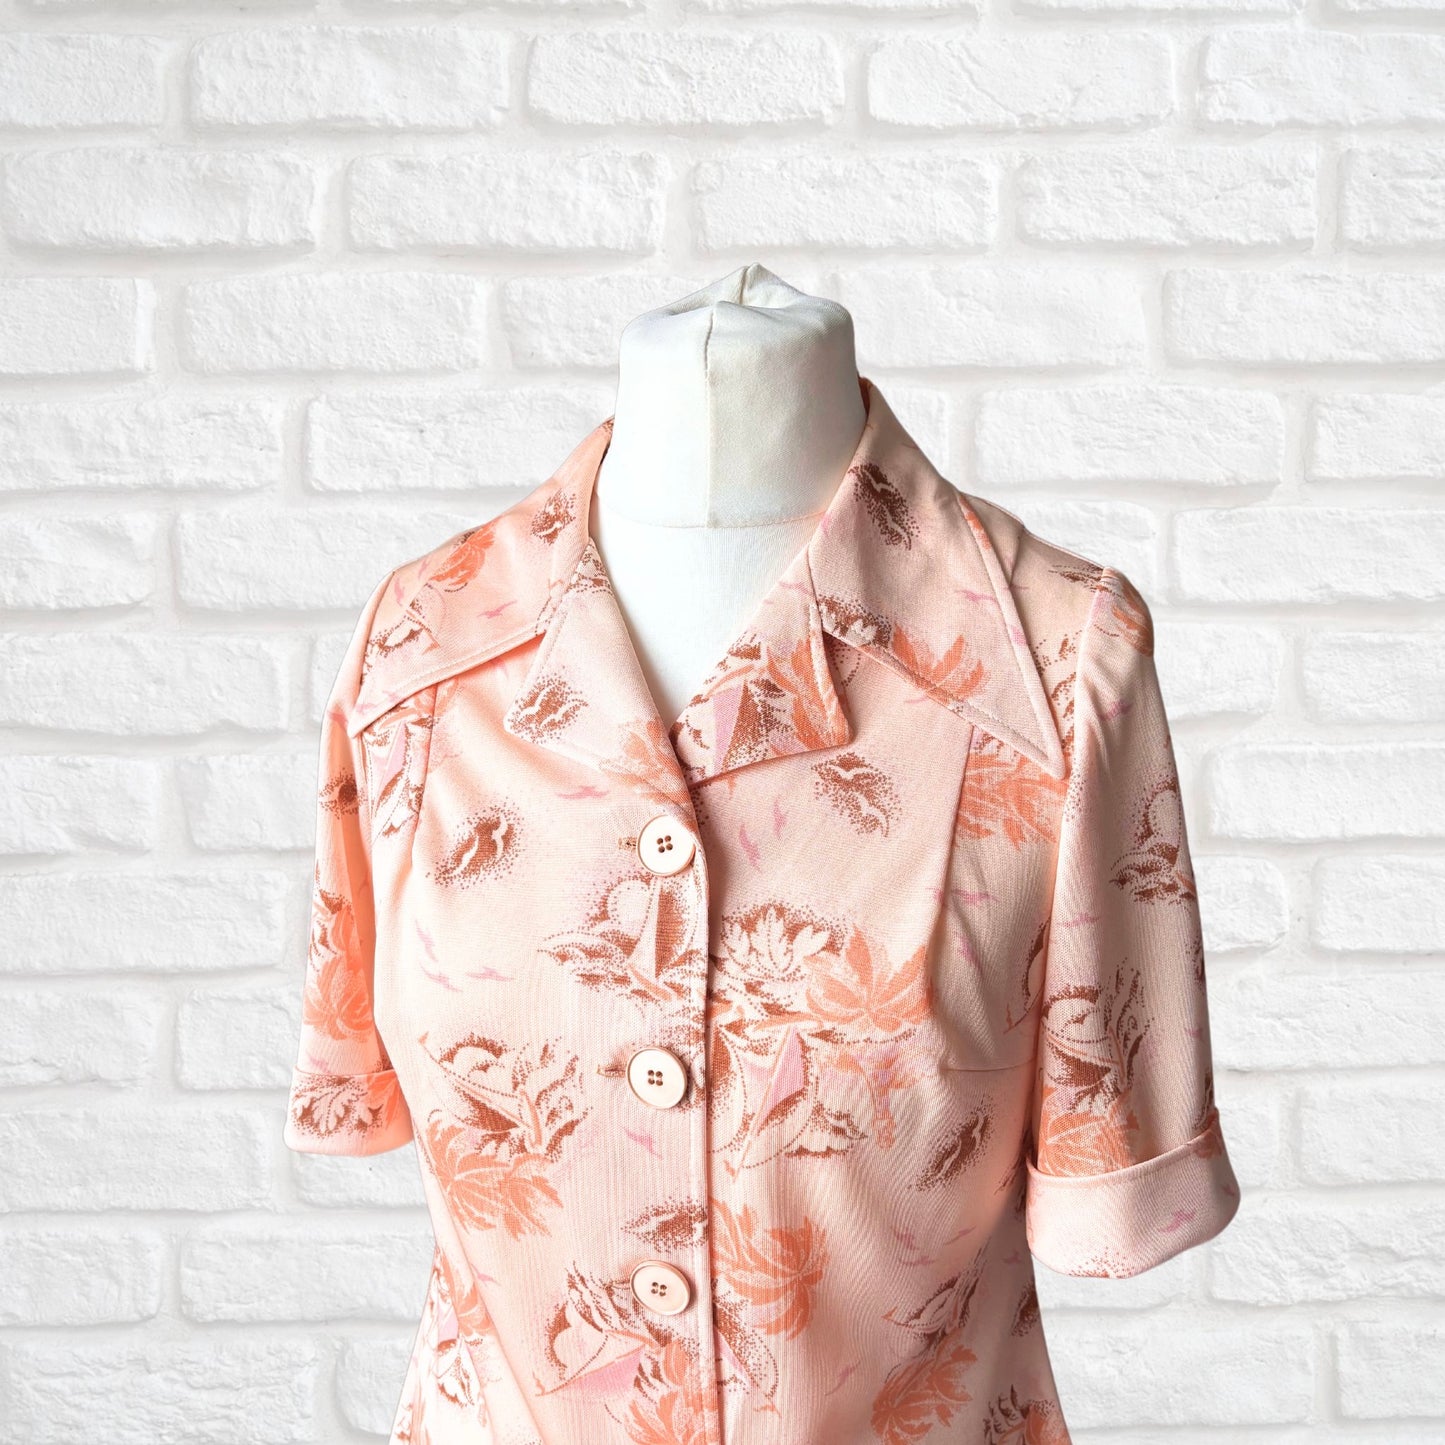 Vintage 70s Dagger Collar Short Sleeved Shirt: Pale Peach with Hawaiian style Novelty Print. Approx UK size 12-14